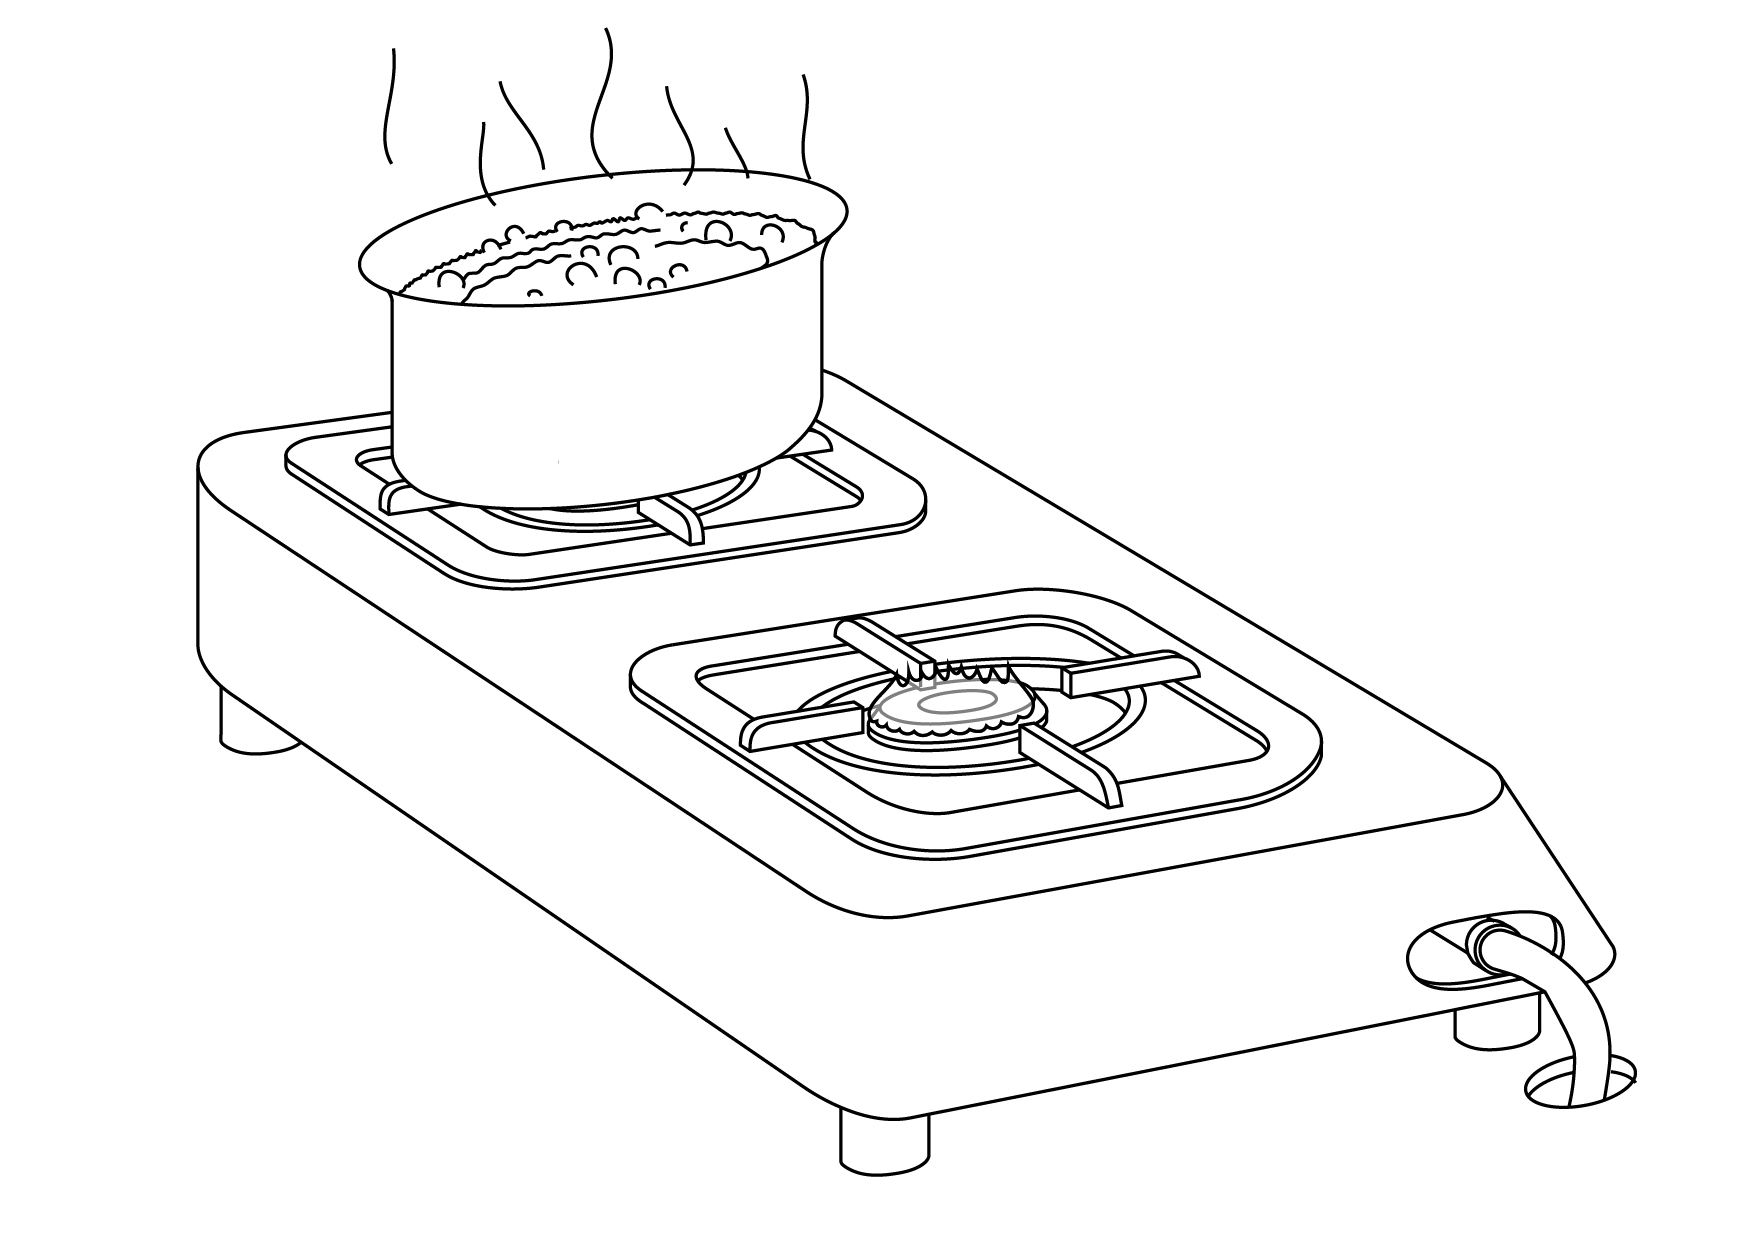 Boiling Pots On Stove Colouring Pages